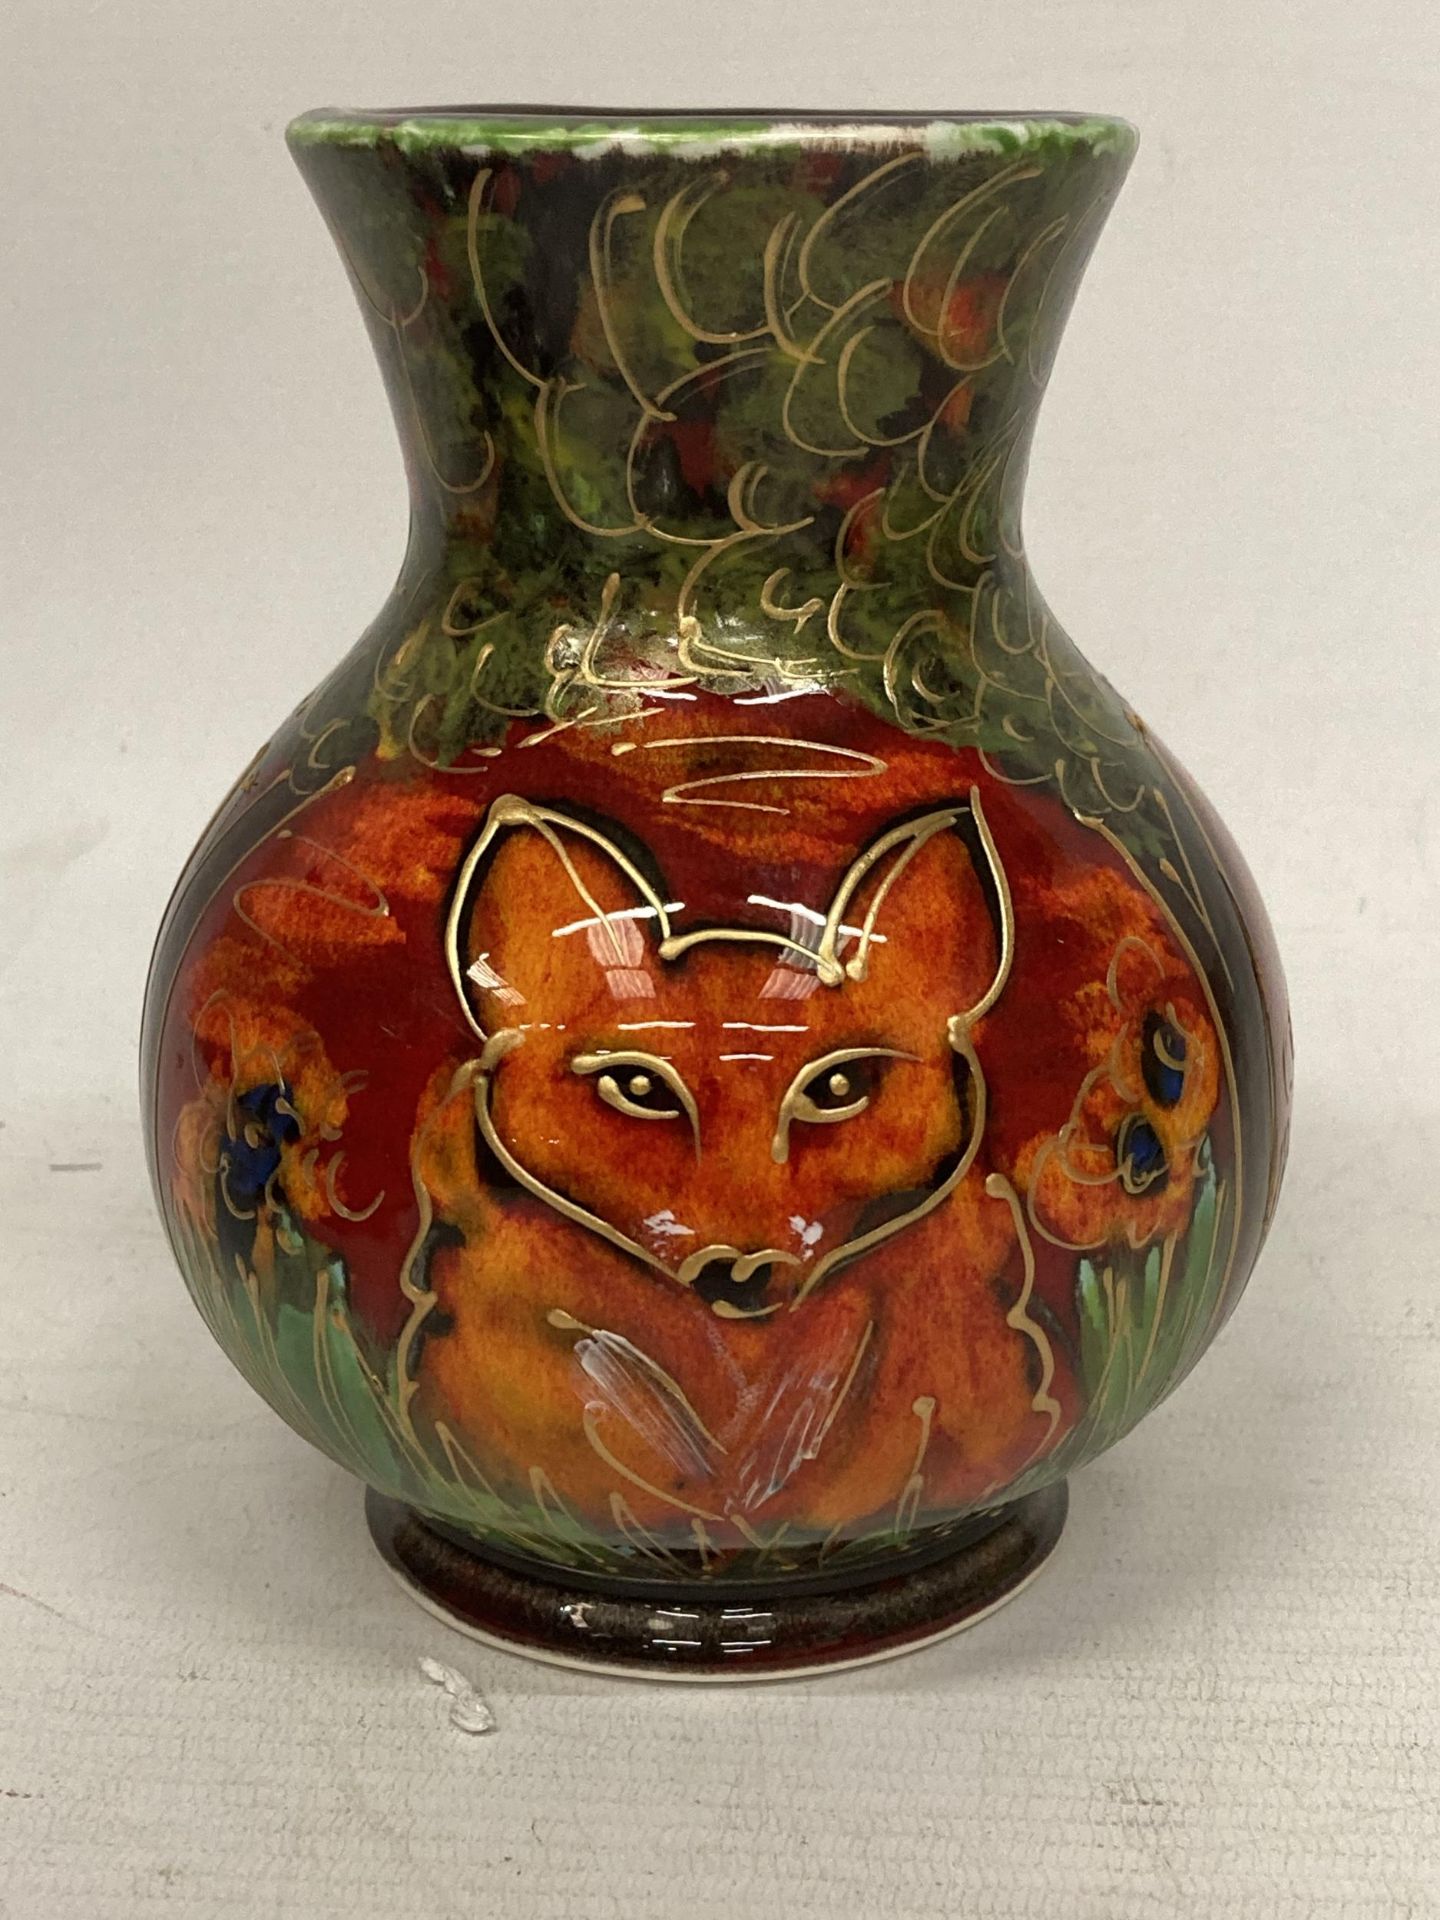 AN ANITA HARRIS HAND PAINTED AND SIGNED IN GOLD FOX VASE